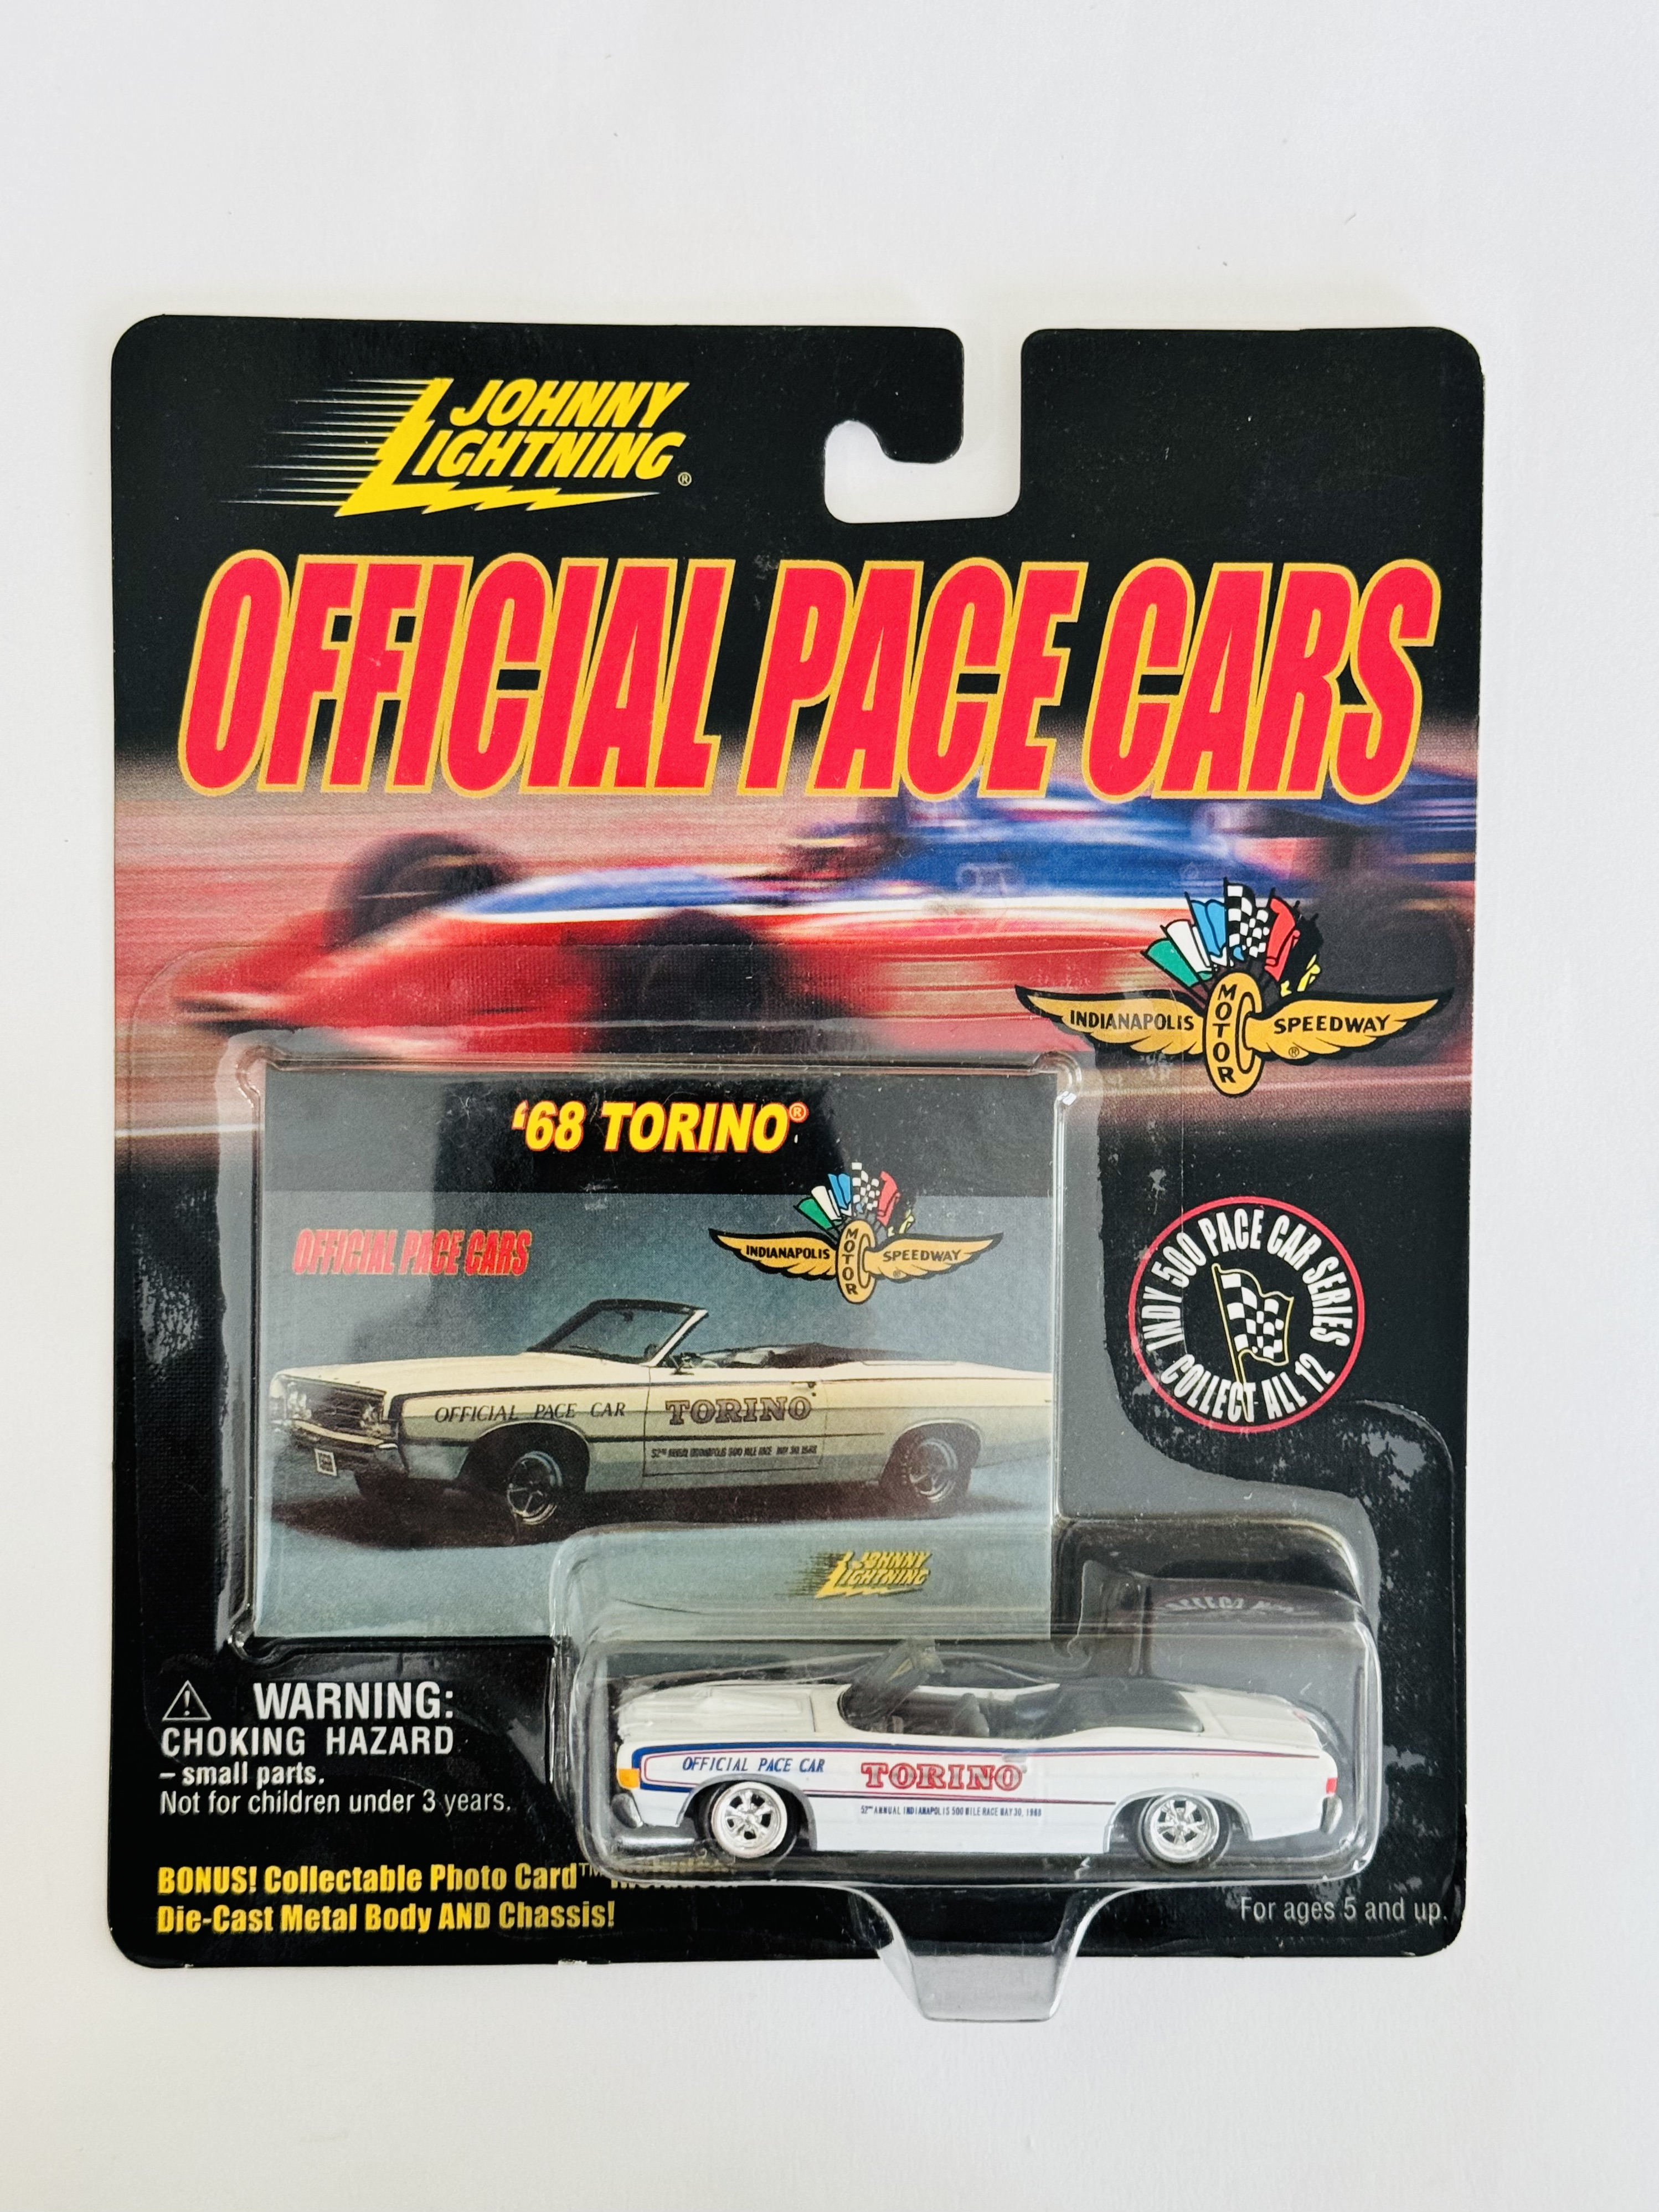 Johnny Lightning Indy 500 Official Pace Cars '68 Torino